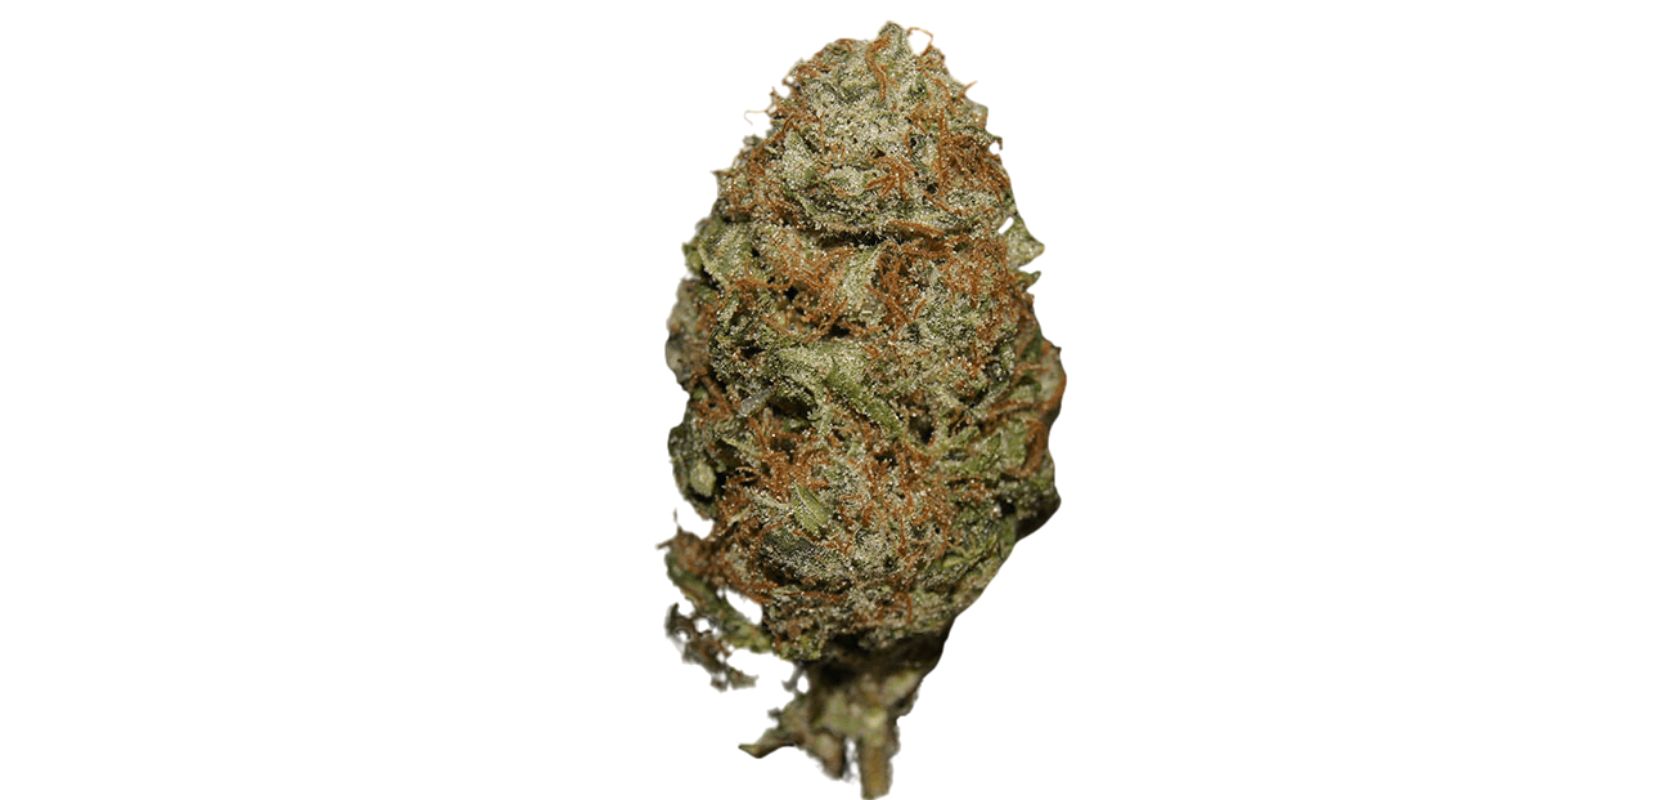 The THC content in the Bruce Banner strain varies between 22% to 29%, making it one of the most potent strains available in the market.